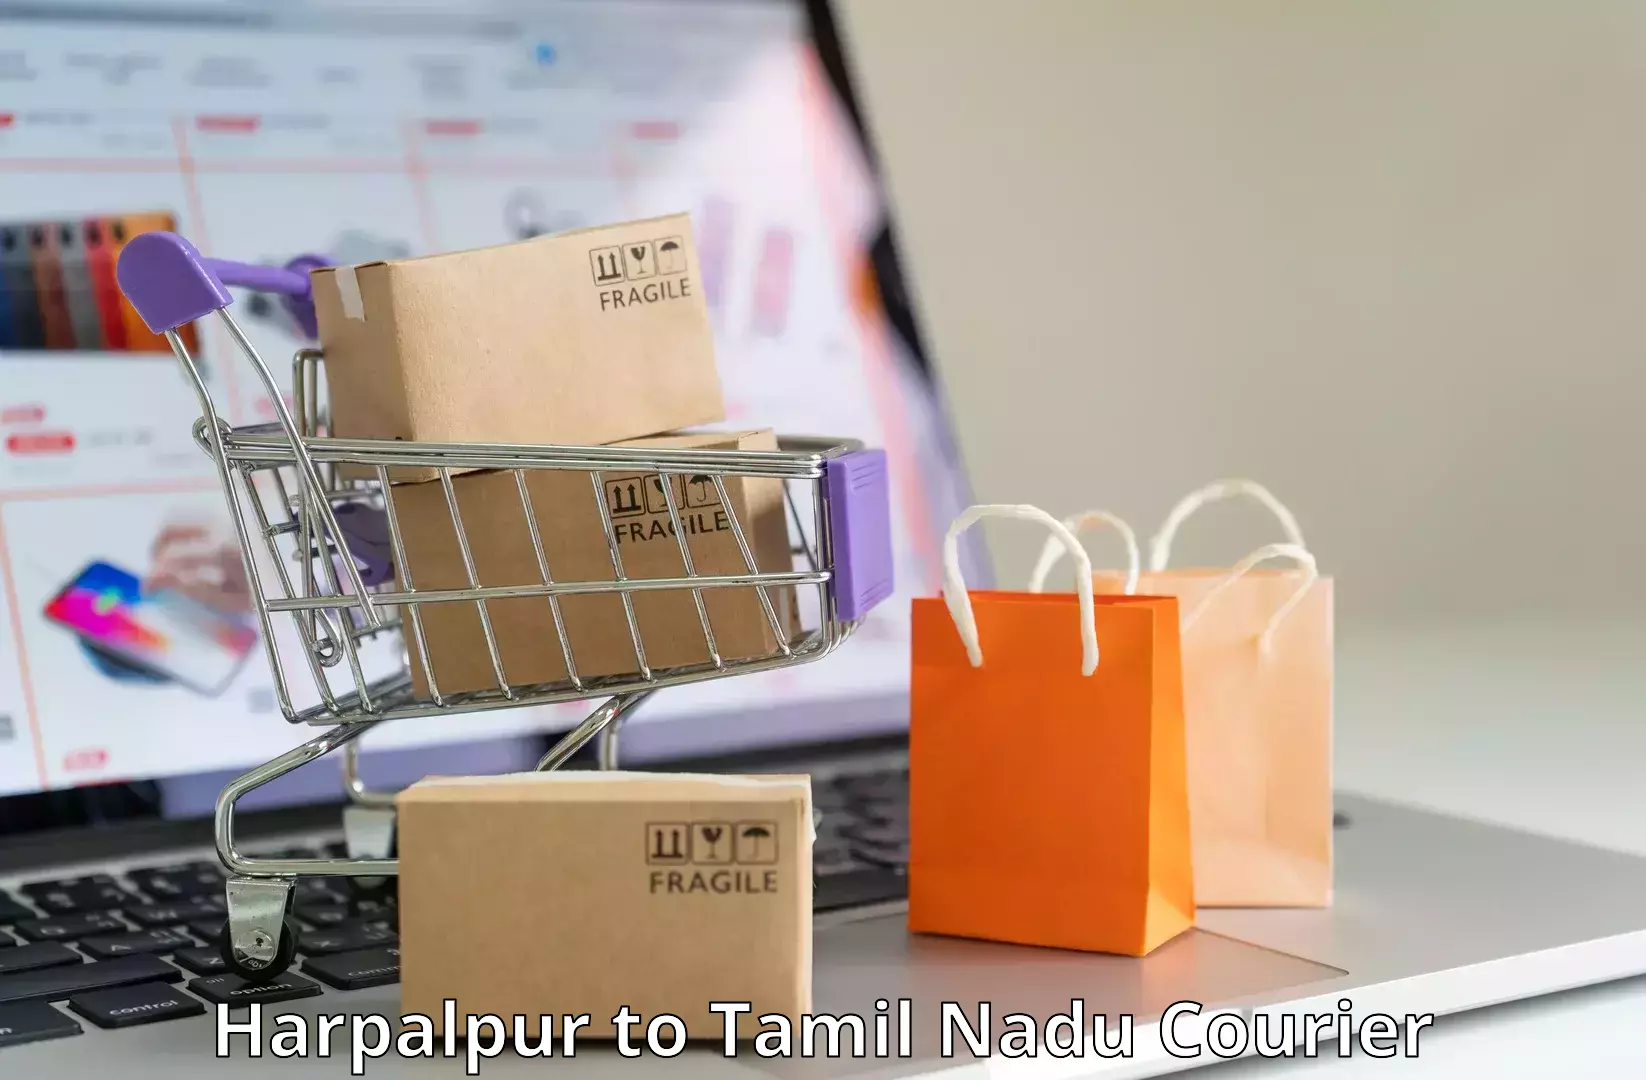 Express delivery capabilities Harpalpur to Coimbatore